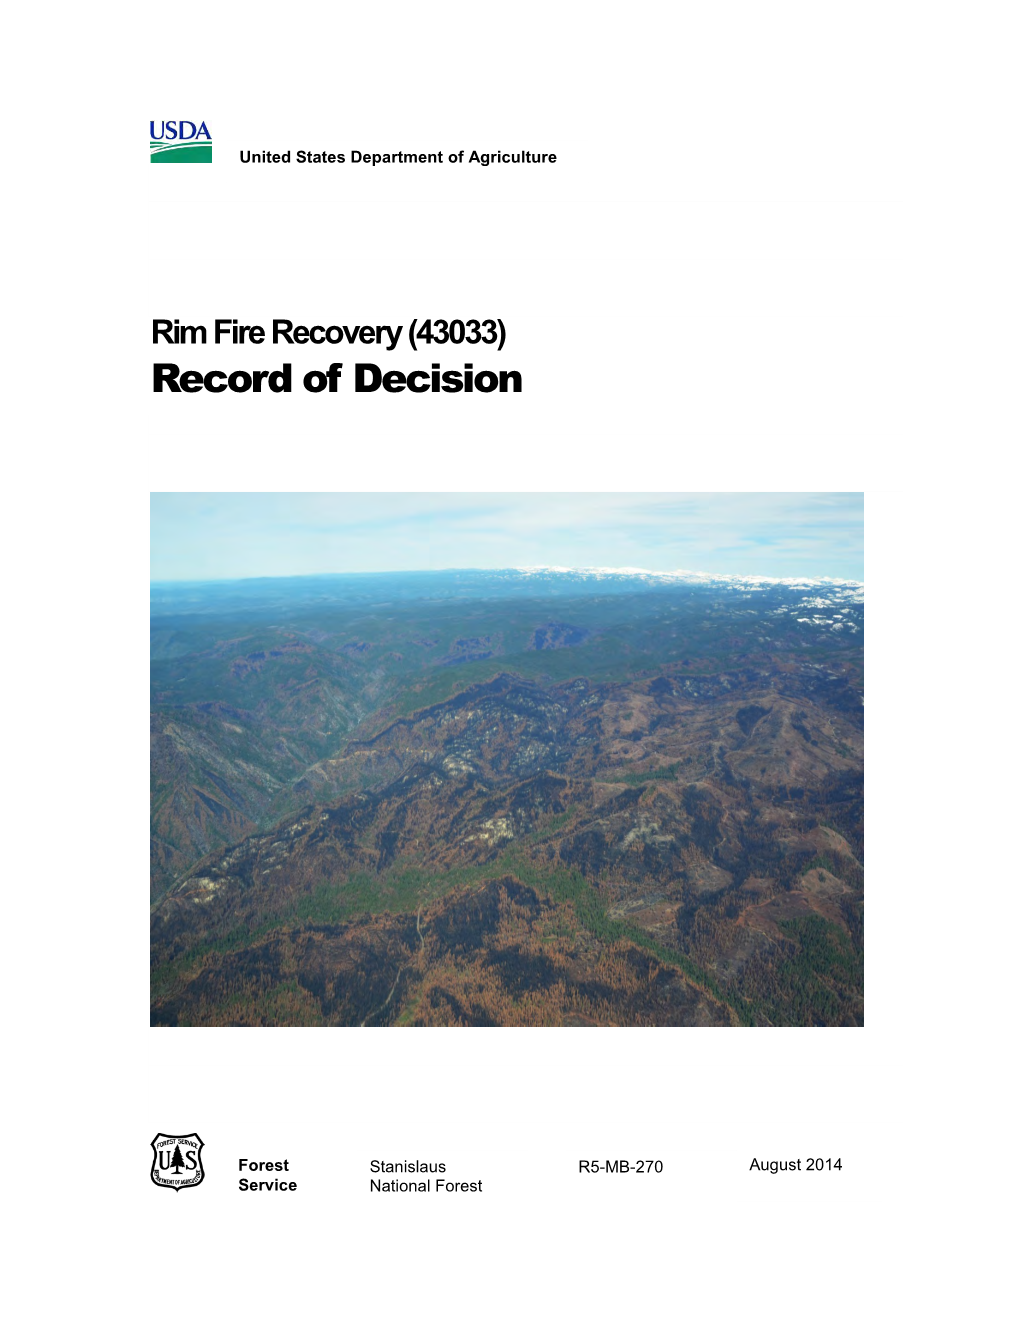 Rim Fire Recovery (43033) Record of Decision